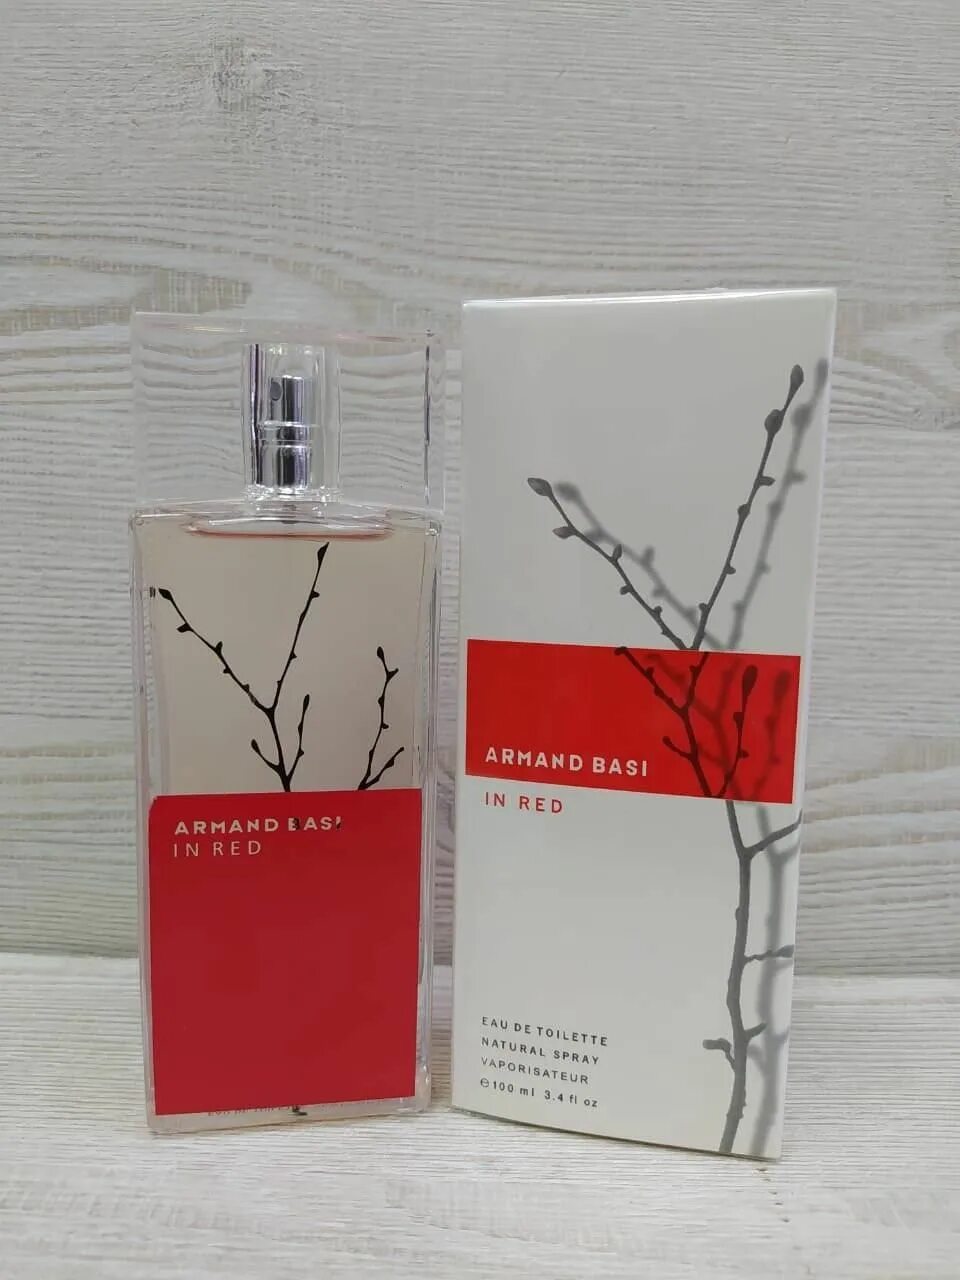 Armand basi in red цены. Armand basi in Red. Armand basi in Red 55ml. Armand basi in Red (w) EDT 100 ml. Armand basi in Red Armand basi.